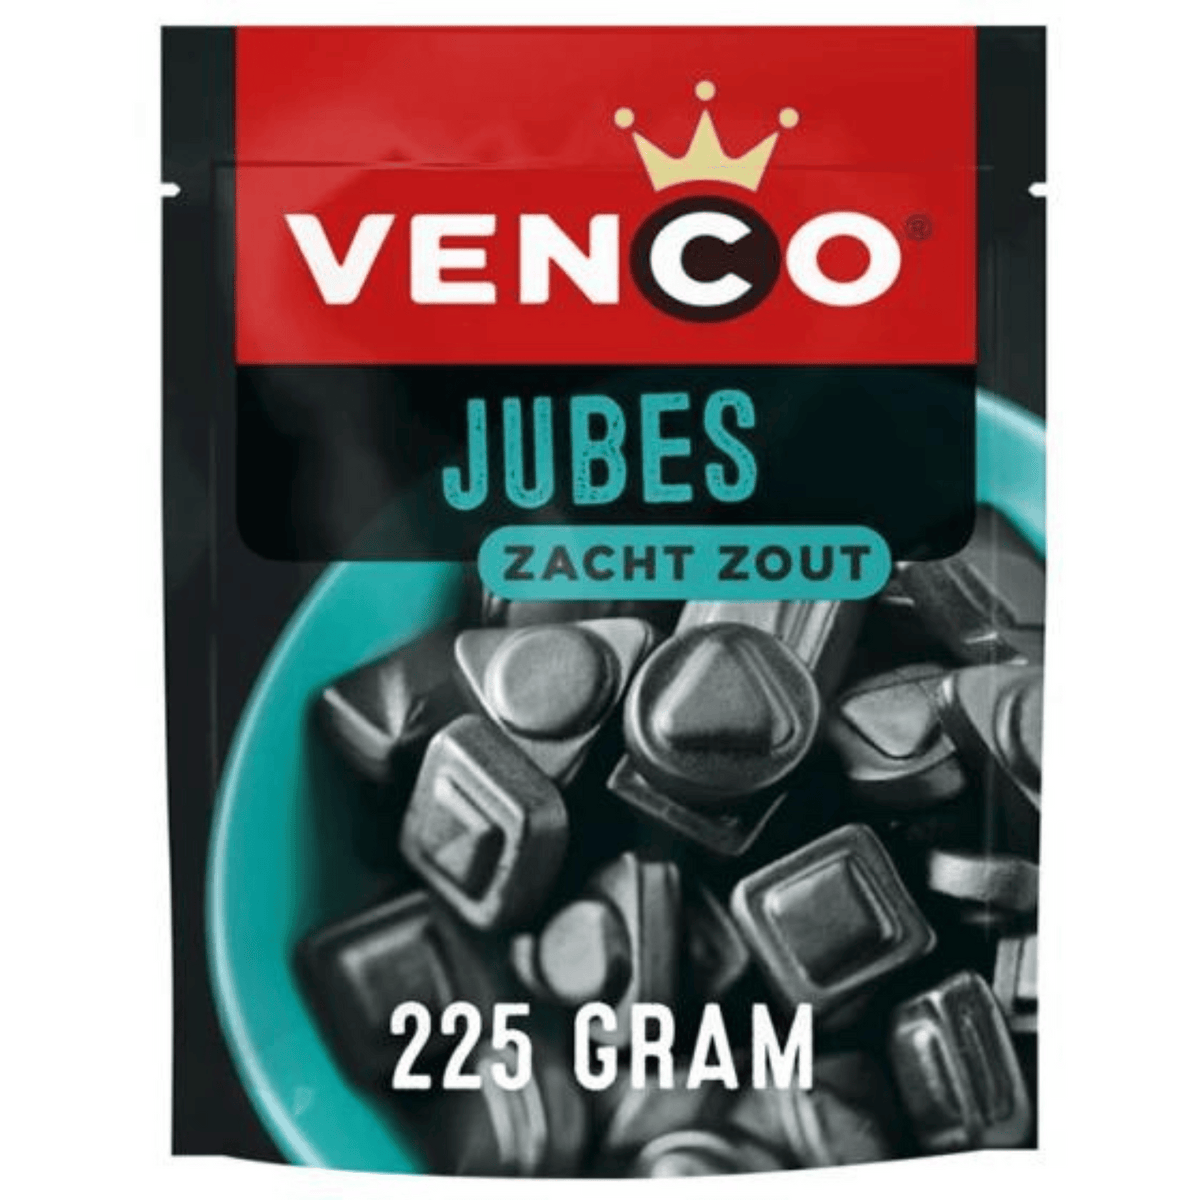 Primary Image of Jubes Zacht Zout Licorice